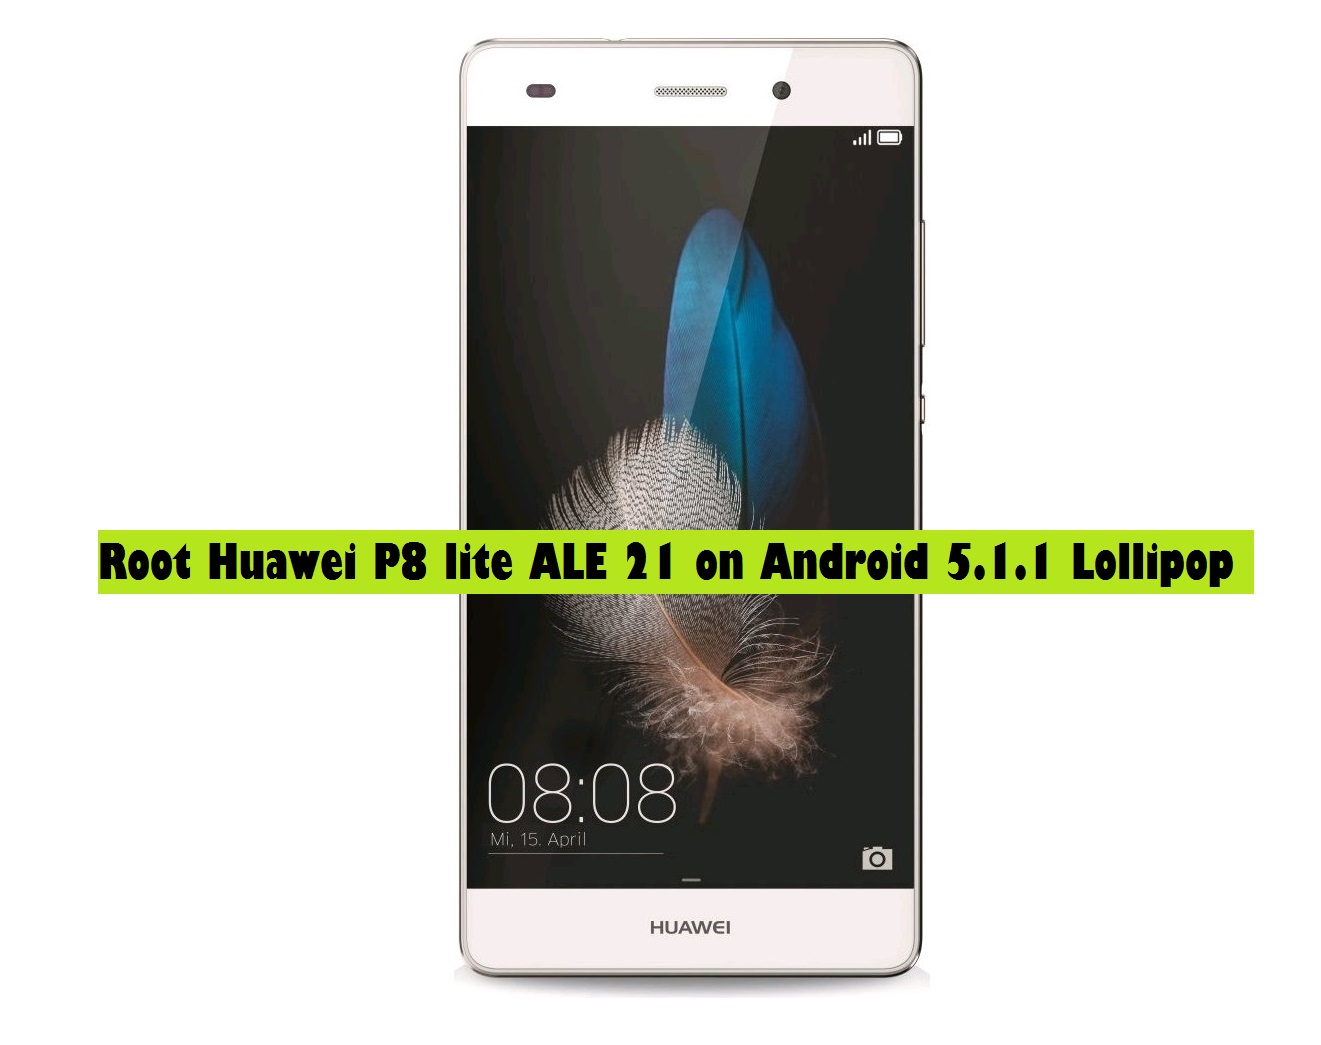 Root Huawei P8 lite ALE 21 on Android 5.1.1 Lollipop – Easy Guide